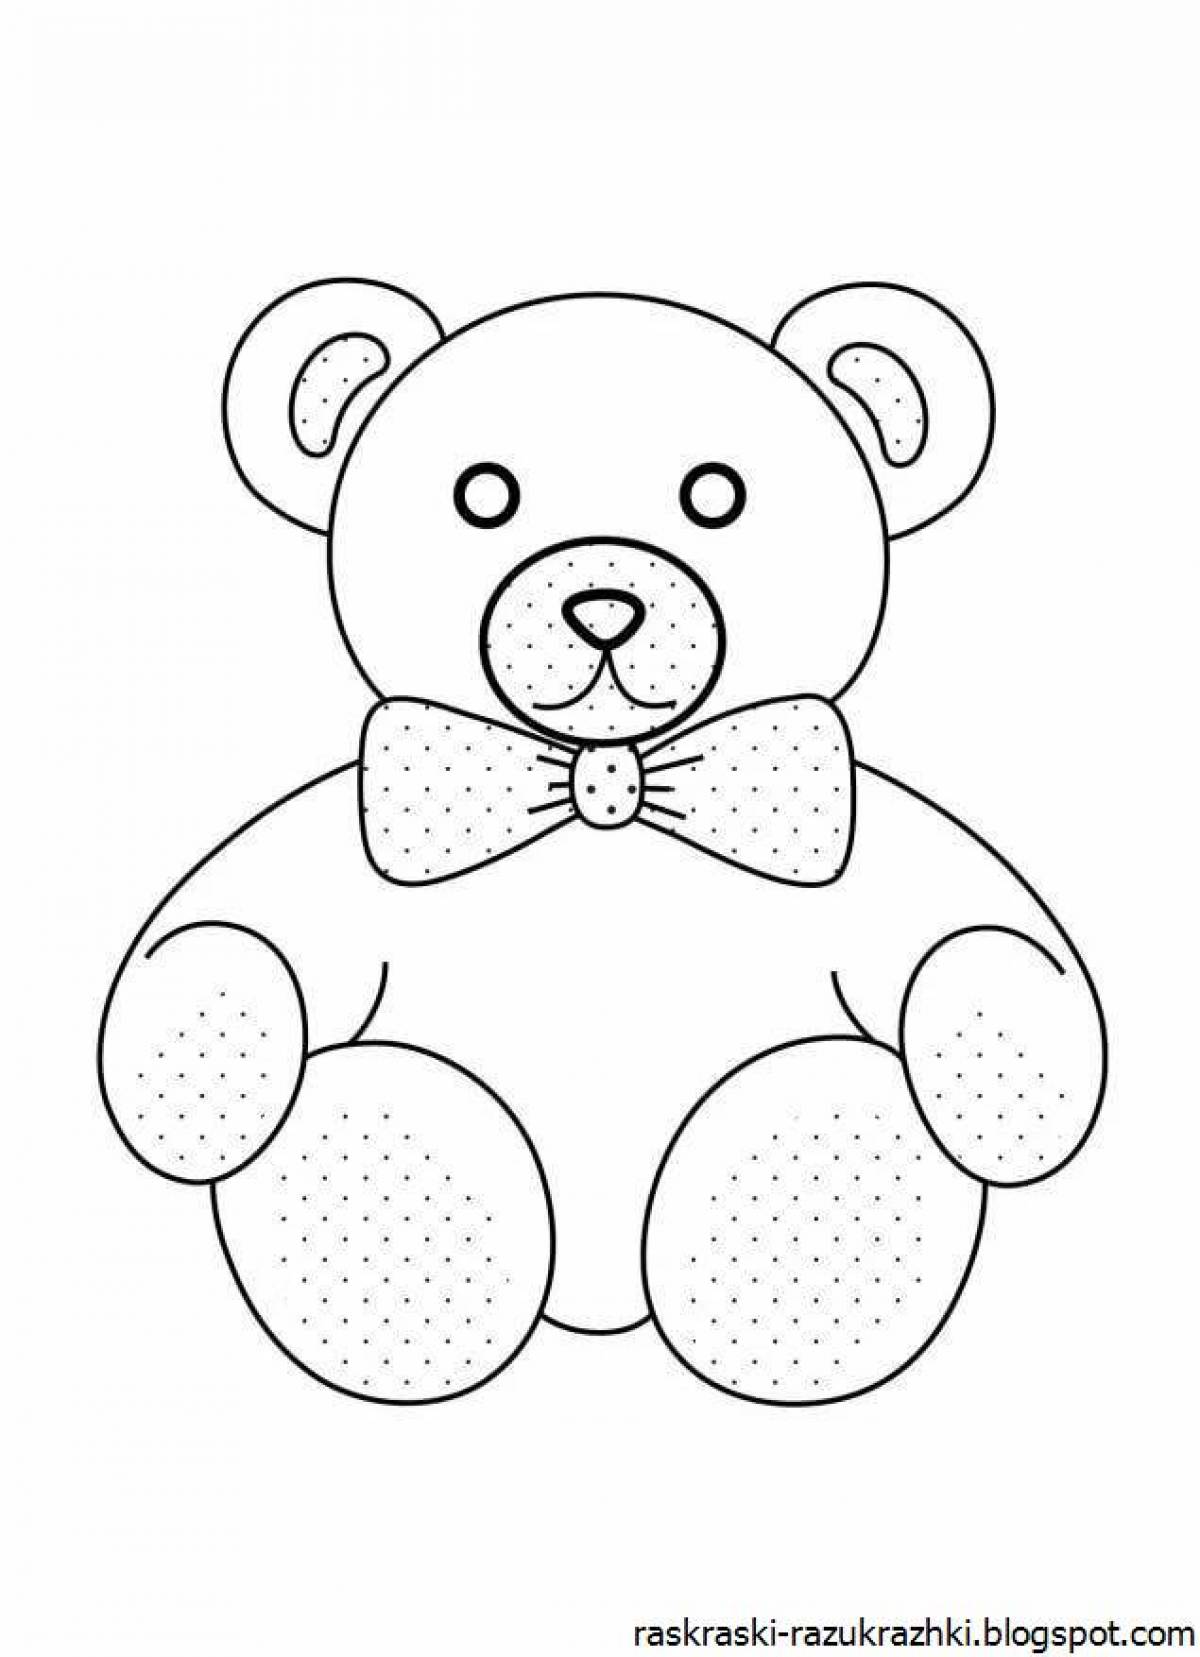 Colorful coloring bear for children 3-4 years old